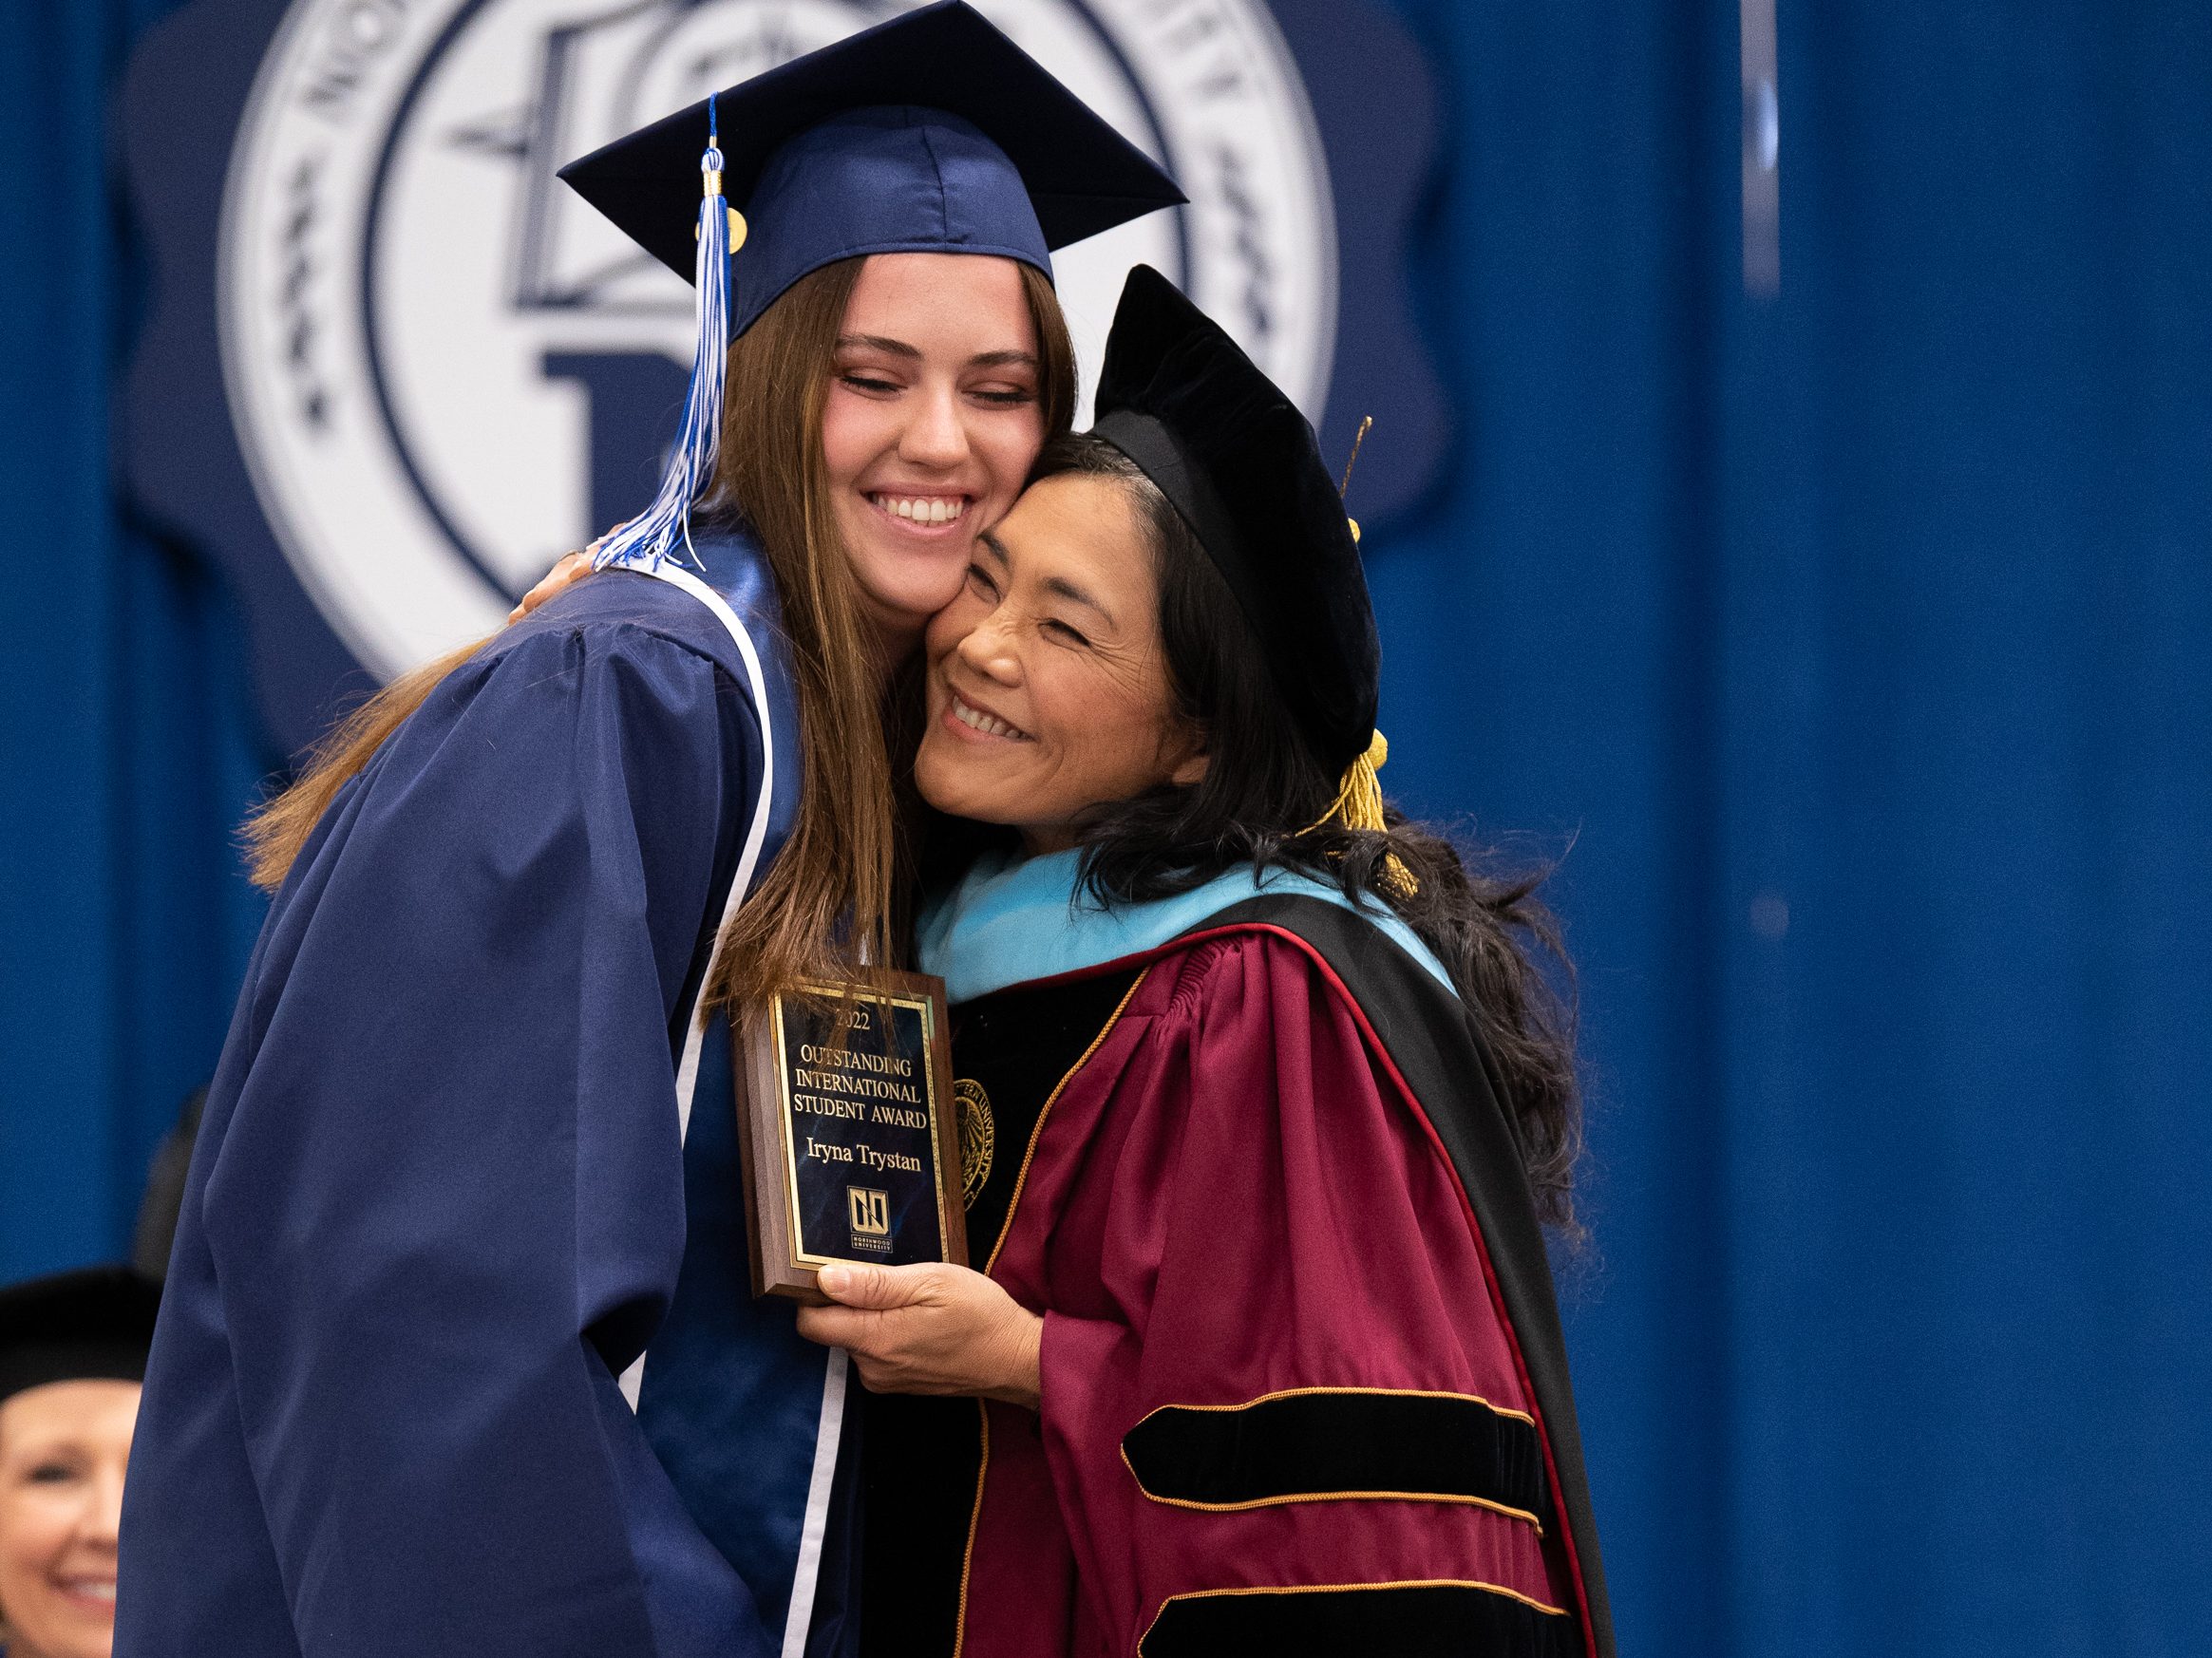 Honors student and faculty advisor embracing on stage